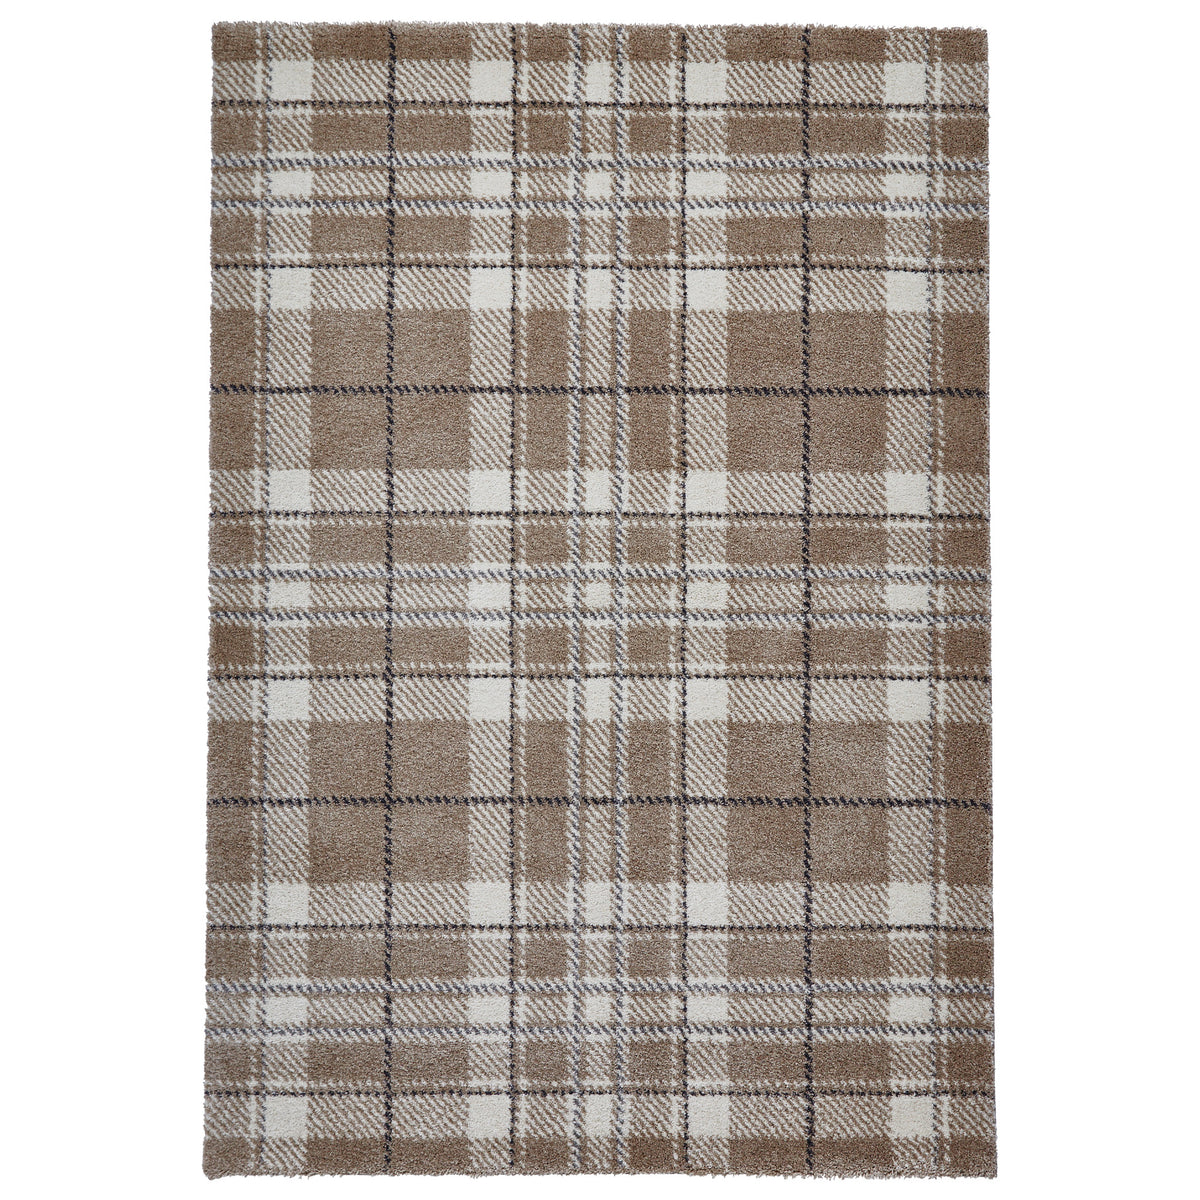 Sunbury Natural Check Patterned Rug from Roseland Furniture